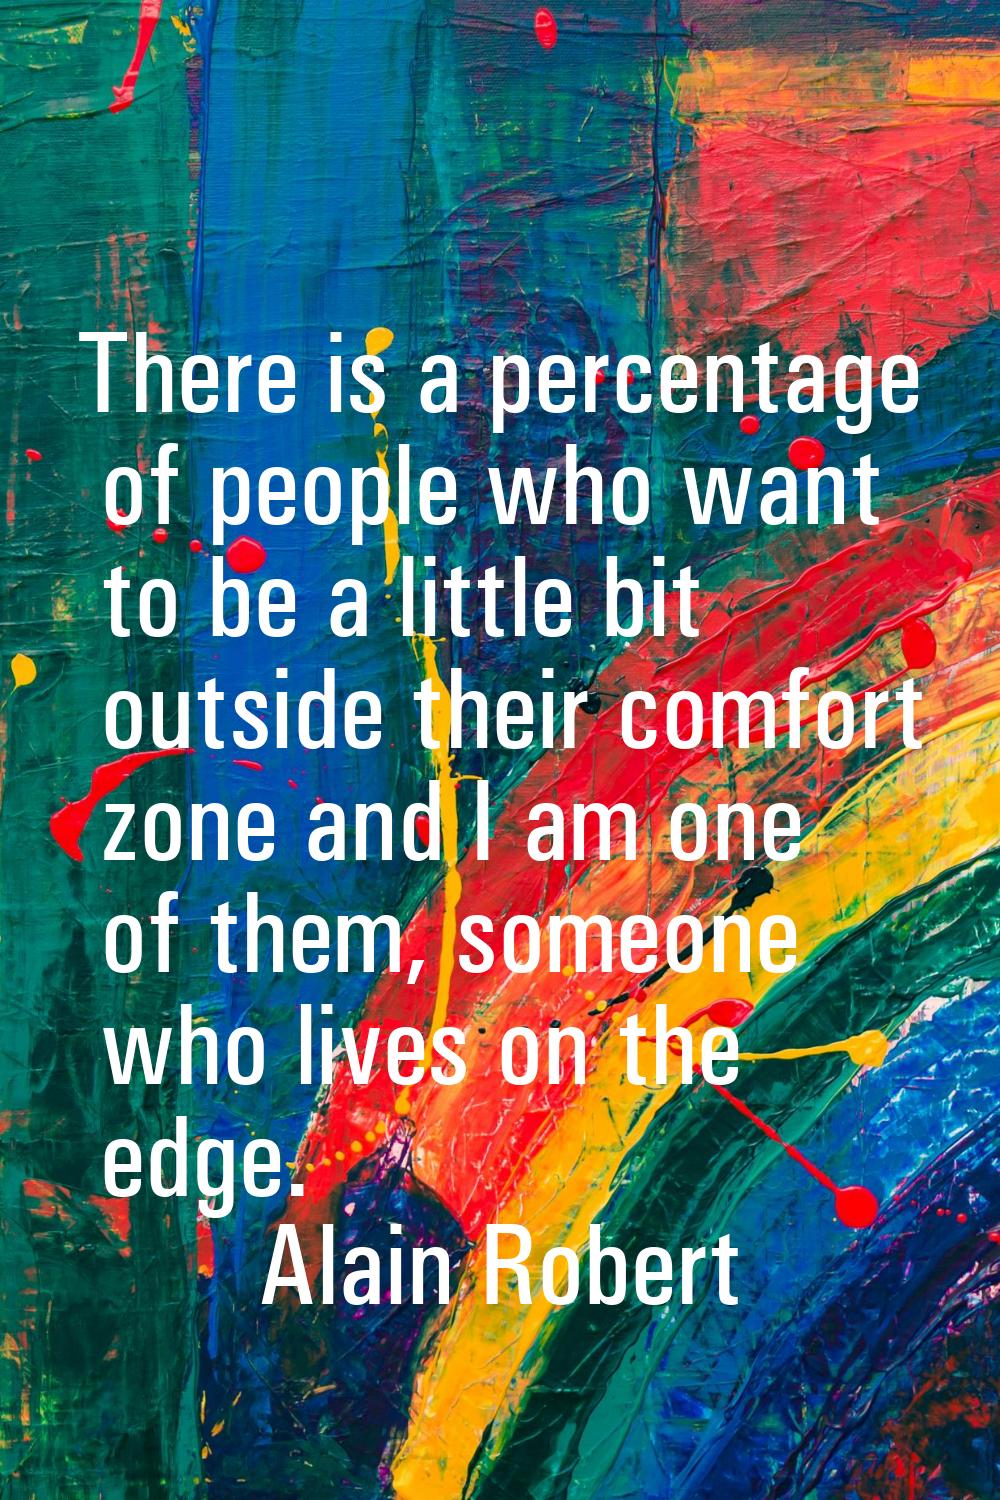 There is a percentage of people who want to be a little bit outside their comfort zone and I am one